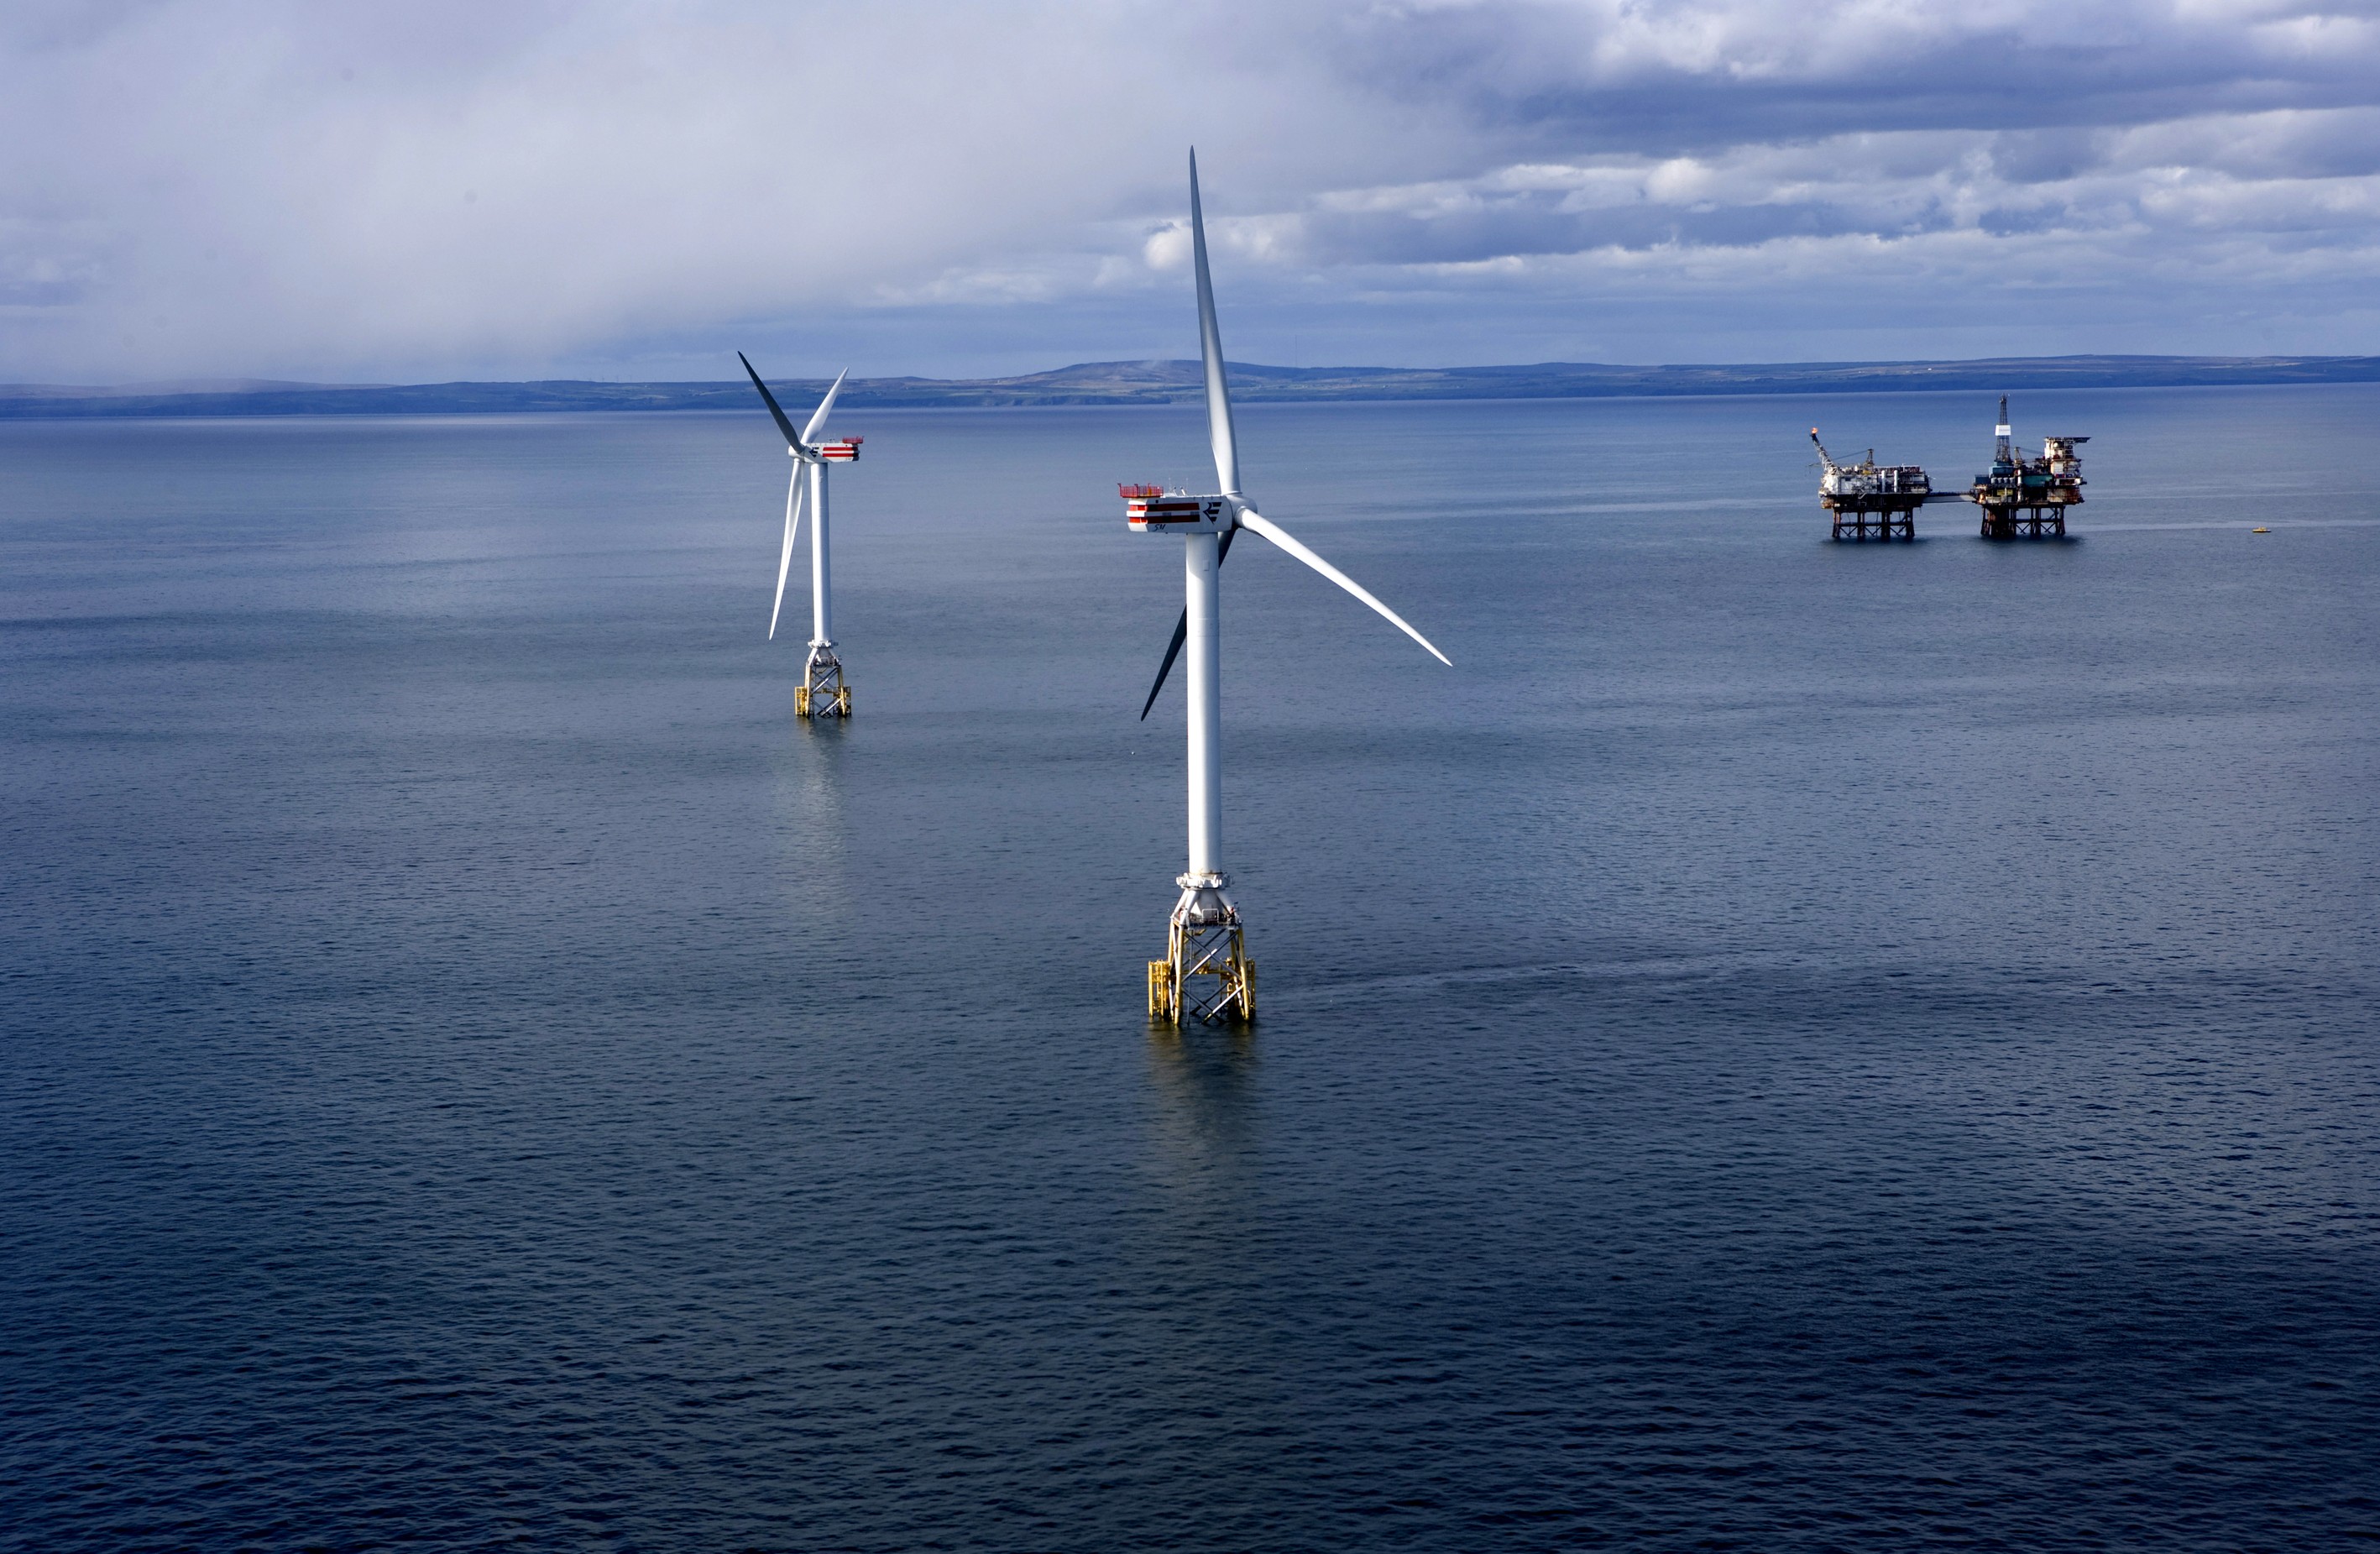 Industry-public partnership founded to oversee ‘exciting new phase’ of Scottish offshore wind sector